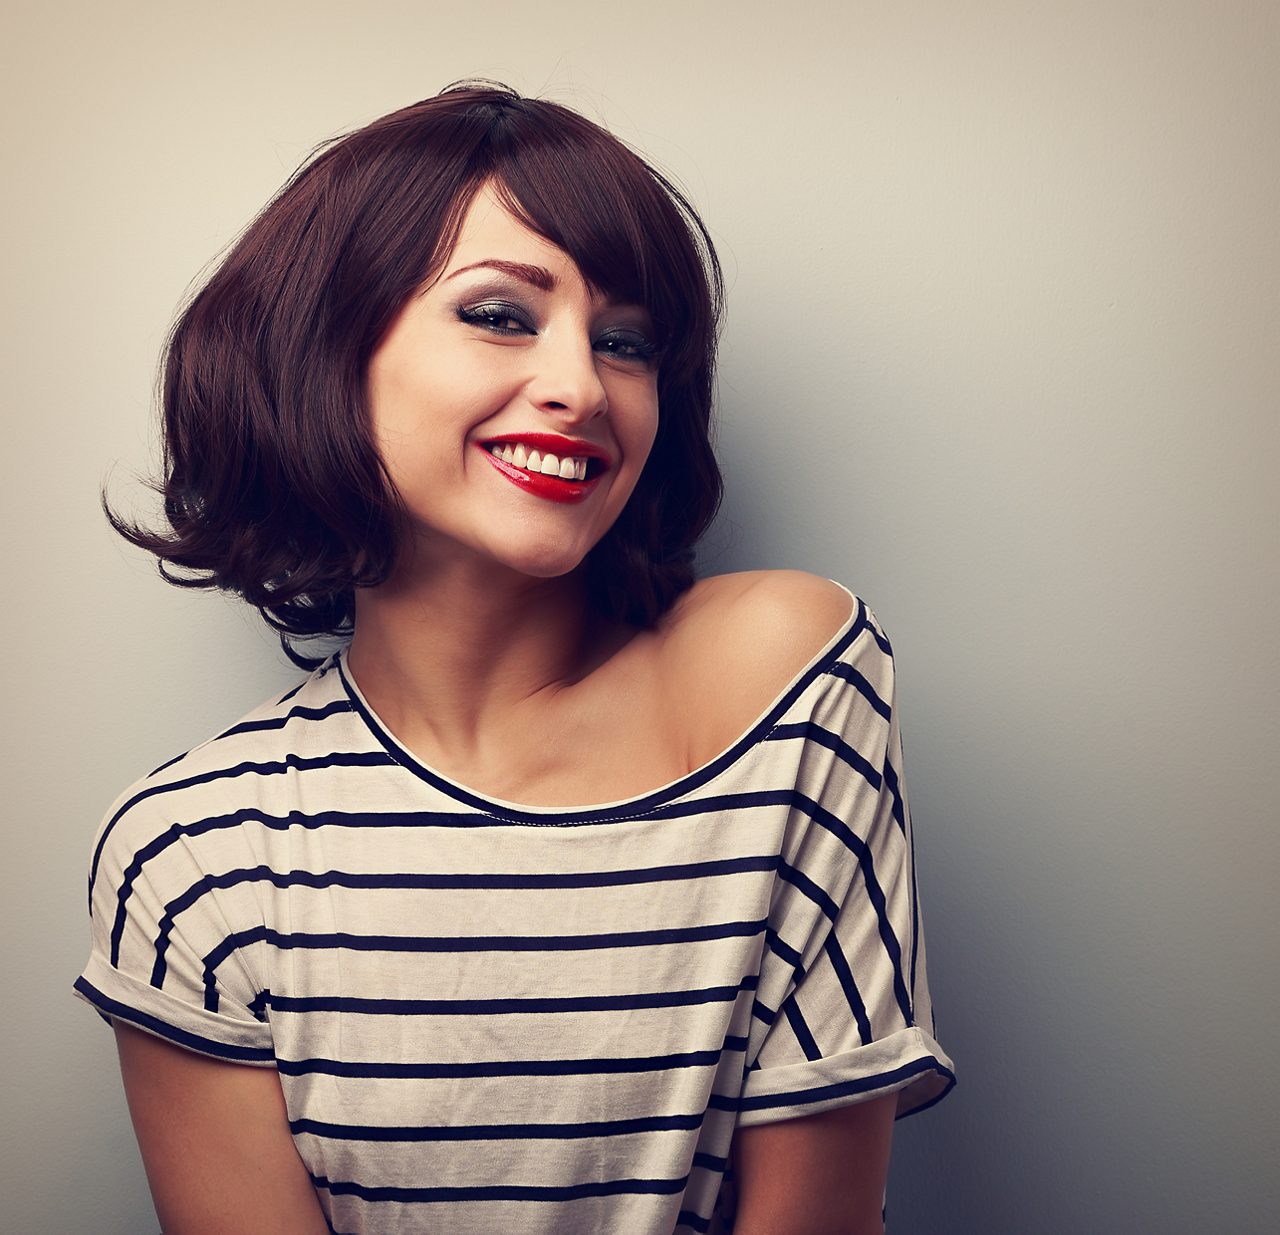 Closeup portrait of a young woman with short hair in fashion blouse and makeup